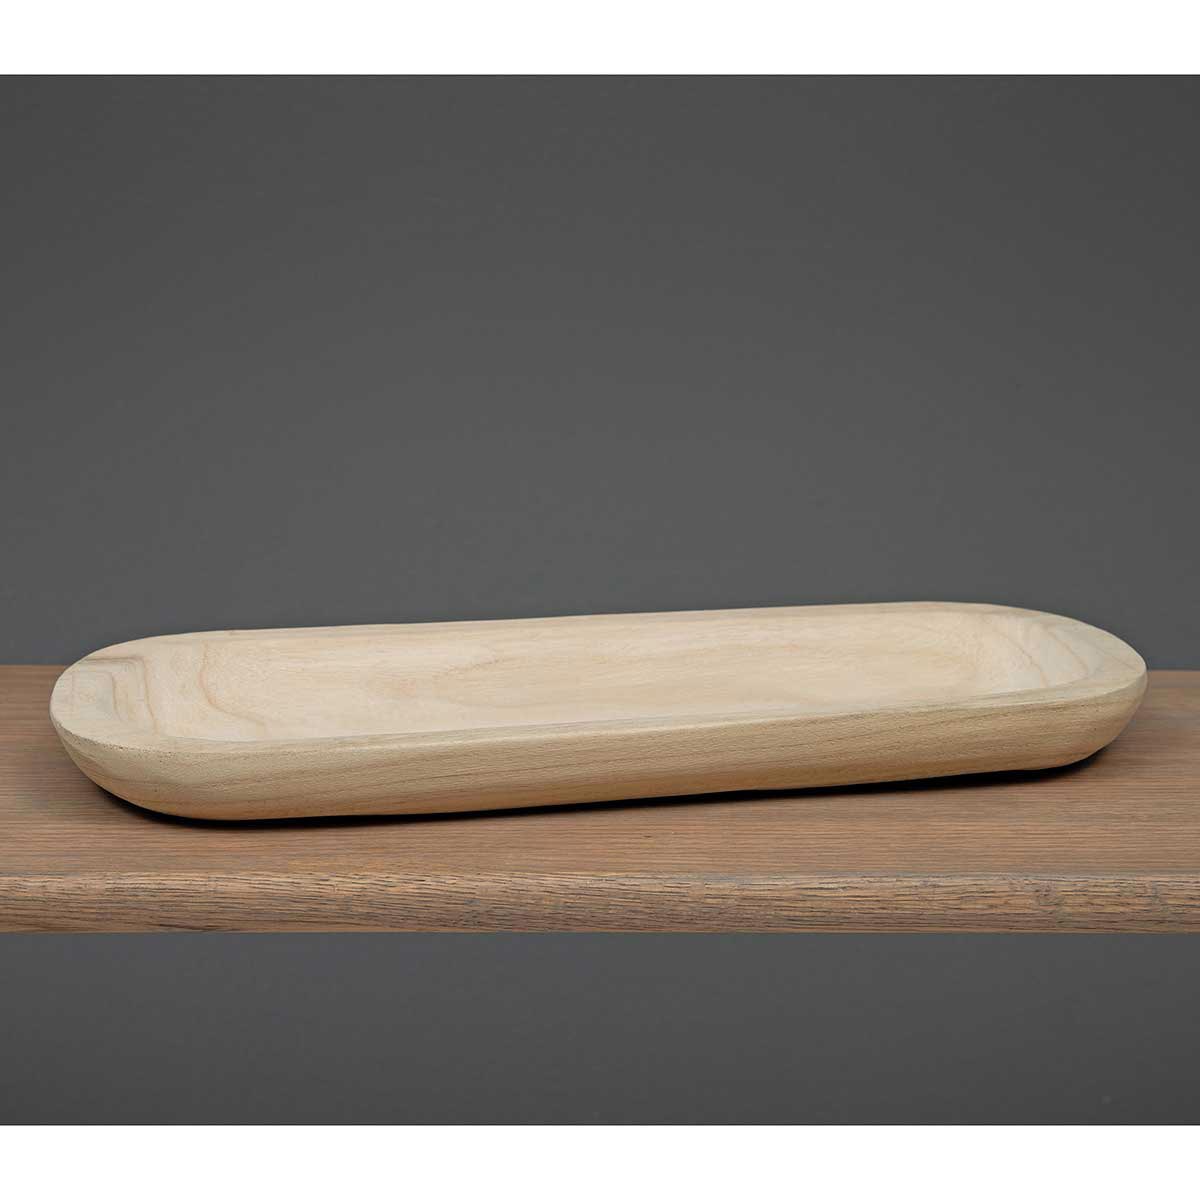 WOOD OVAL TRAY NATURAL 19"X7"X1.75"